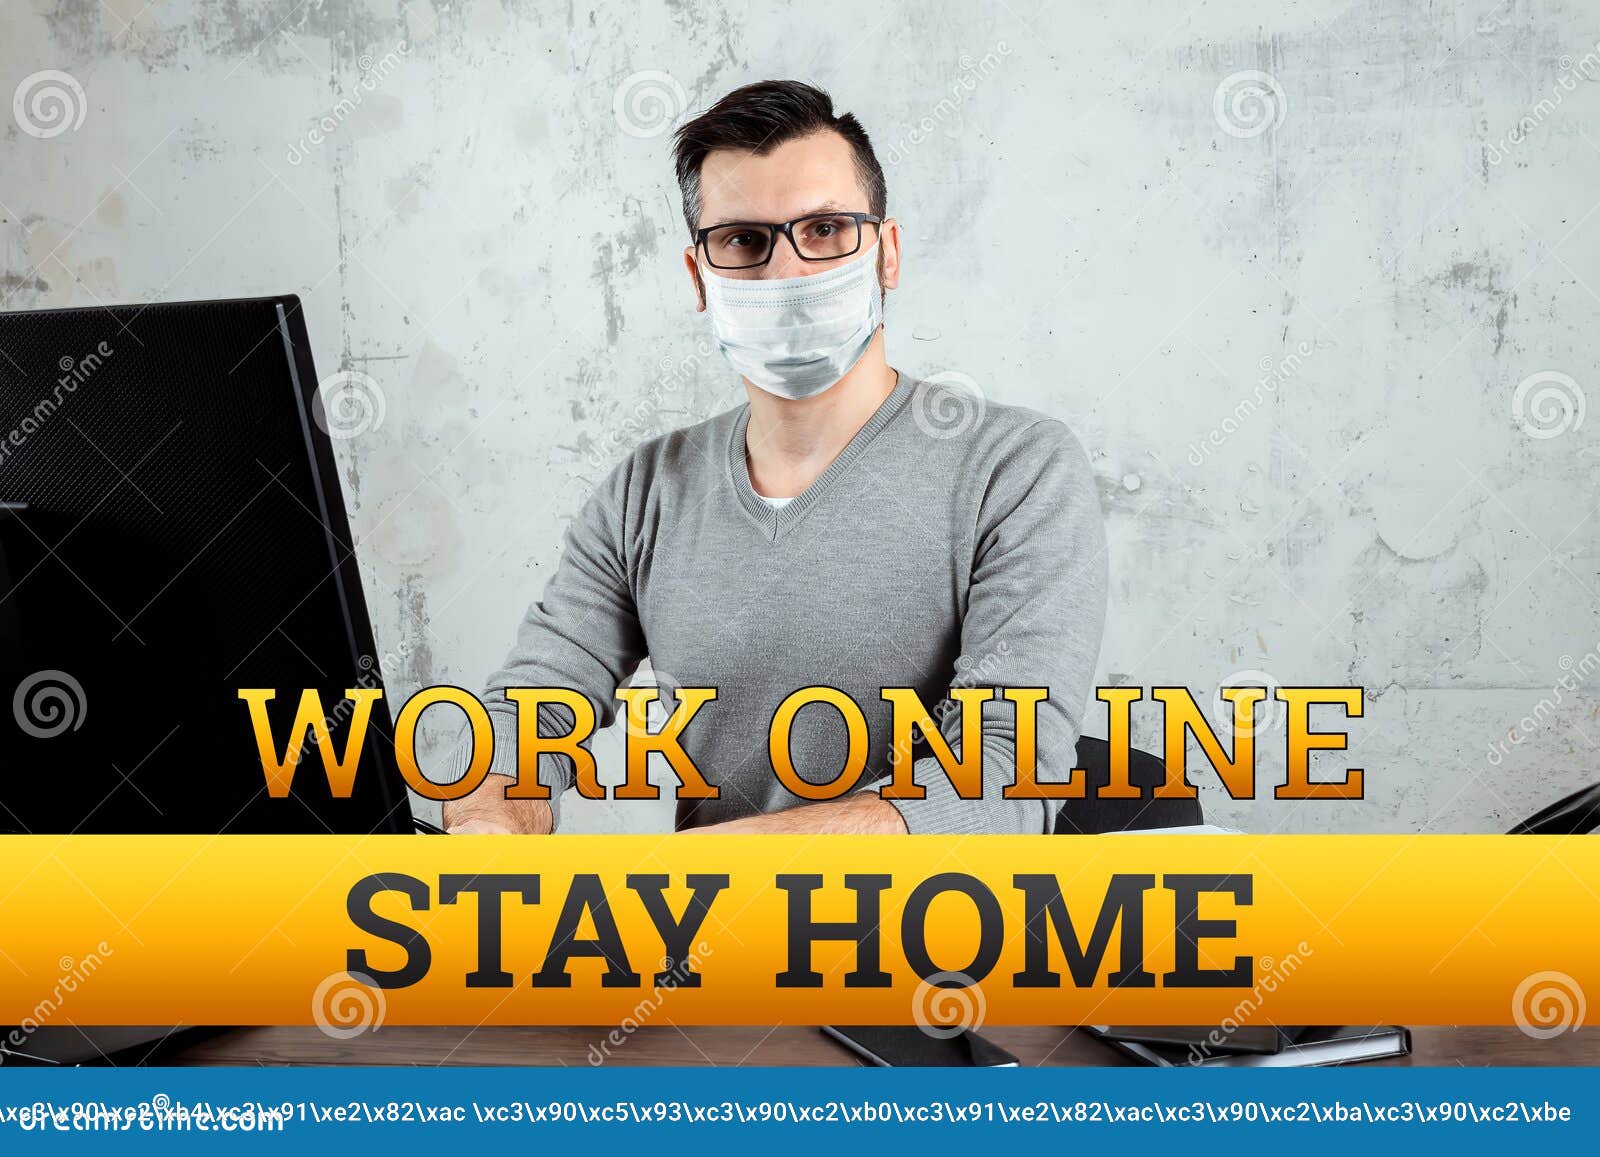 quarantine inscription sit at home, work online, isolation. coronavirus. a man works from home. freelan concept, distant work